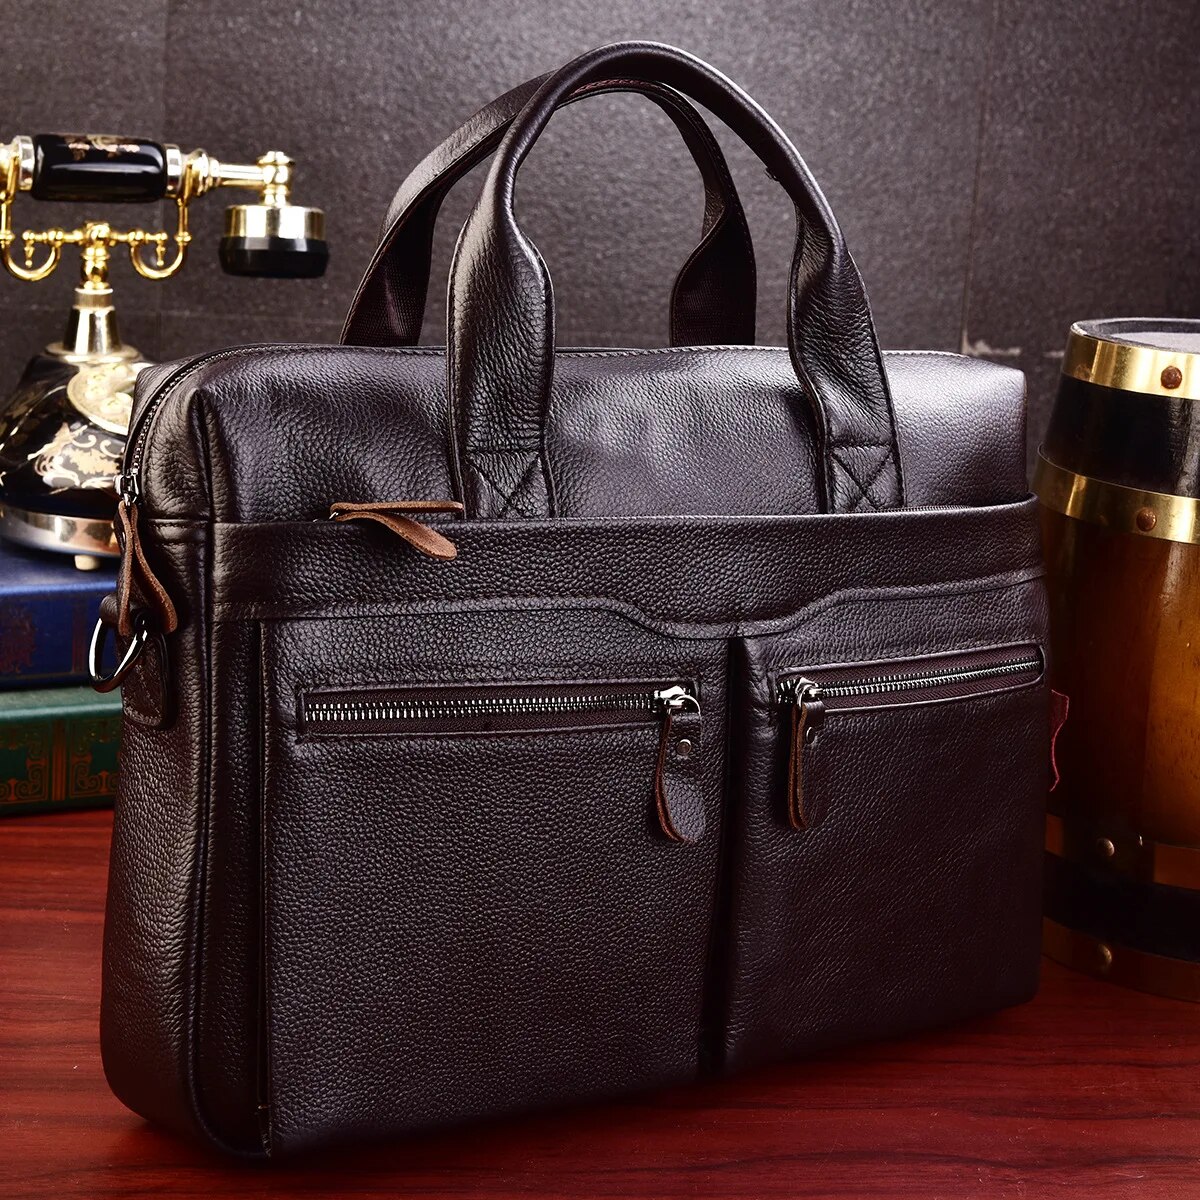 come4buy.com-Business Briefcases Men Cowhide Leather Fit 14'' லேப்டாப் பேக்